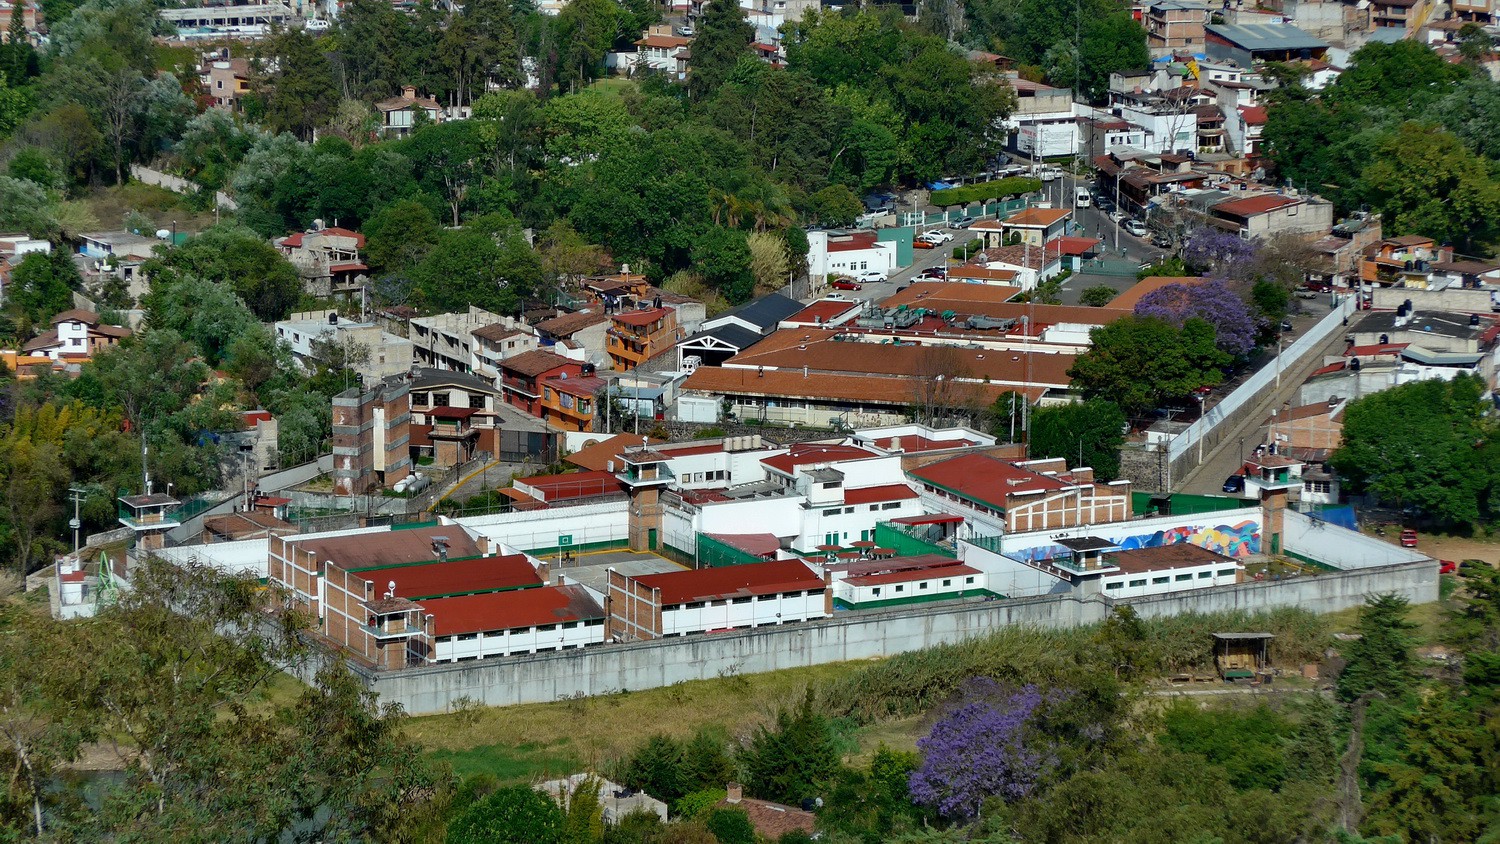 Prison seen from the top of La Peña